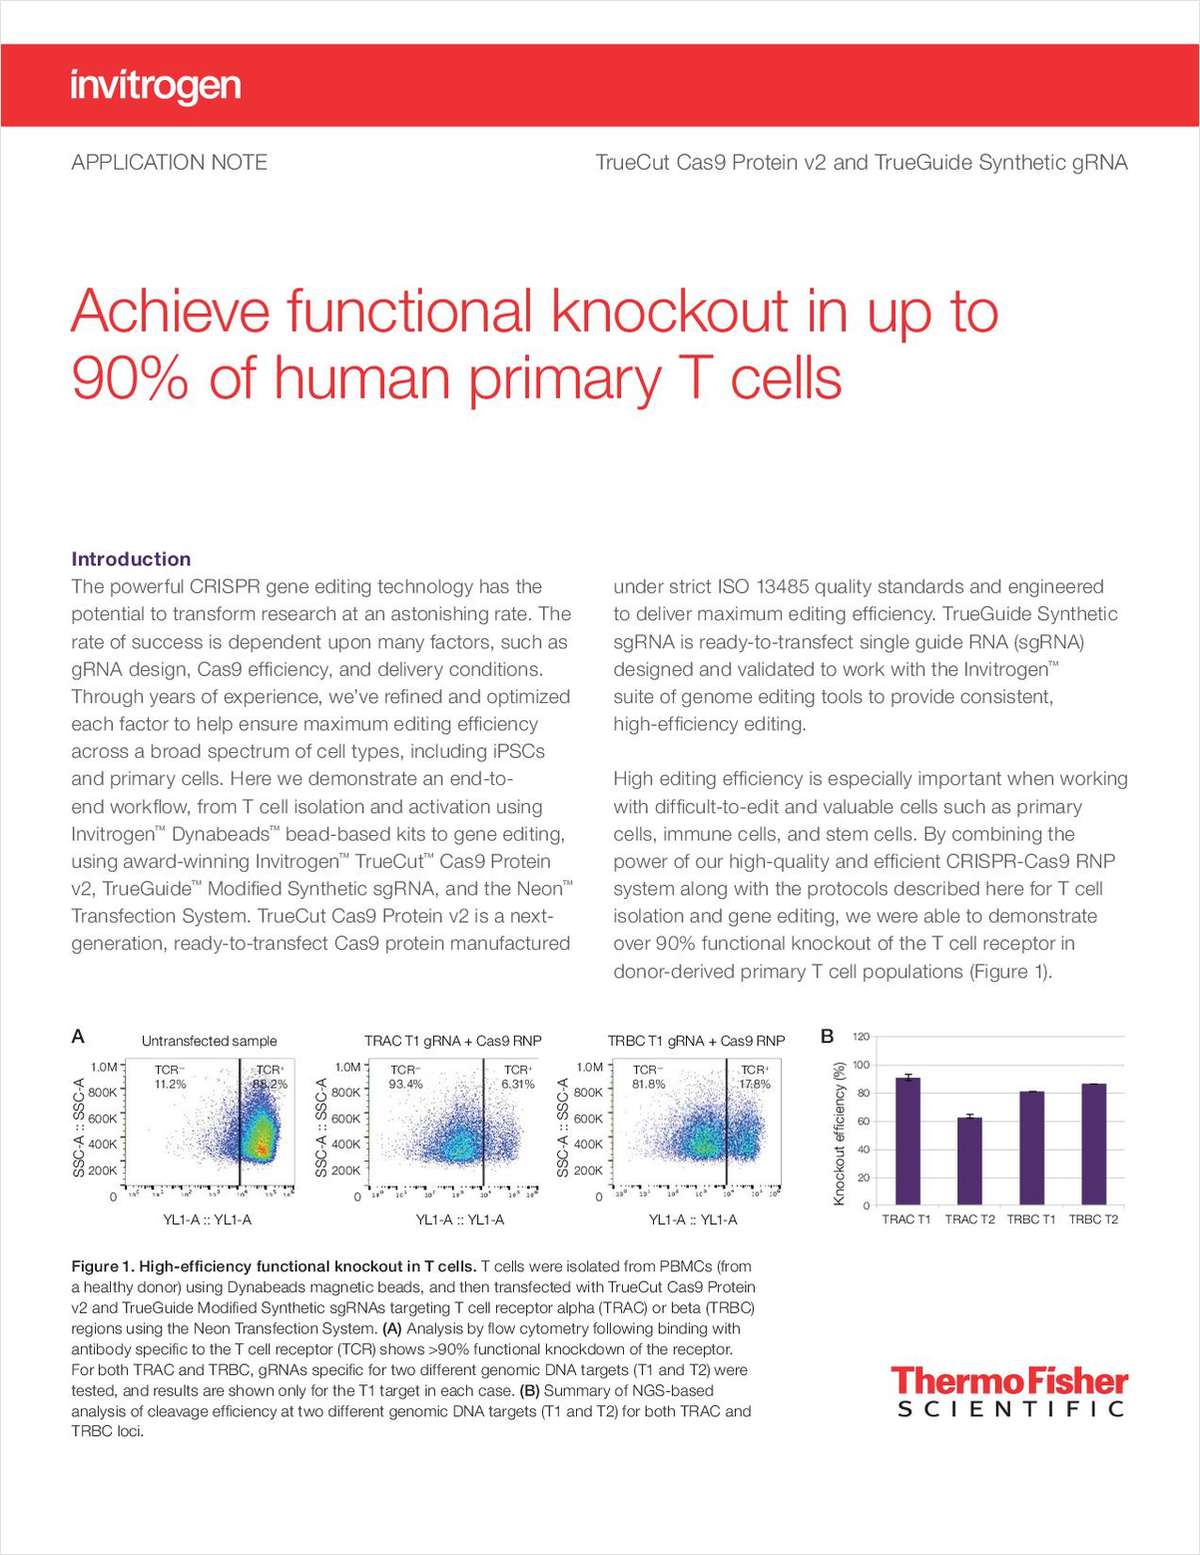 Achieving Functional Knockout in up to 90 Percent of Human Primary T Cells